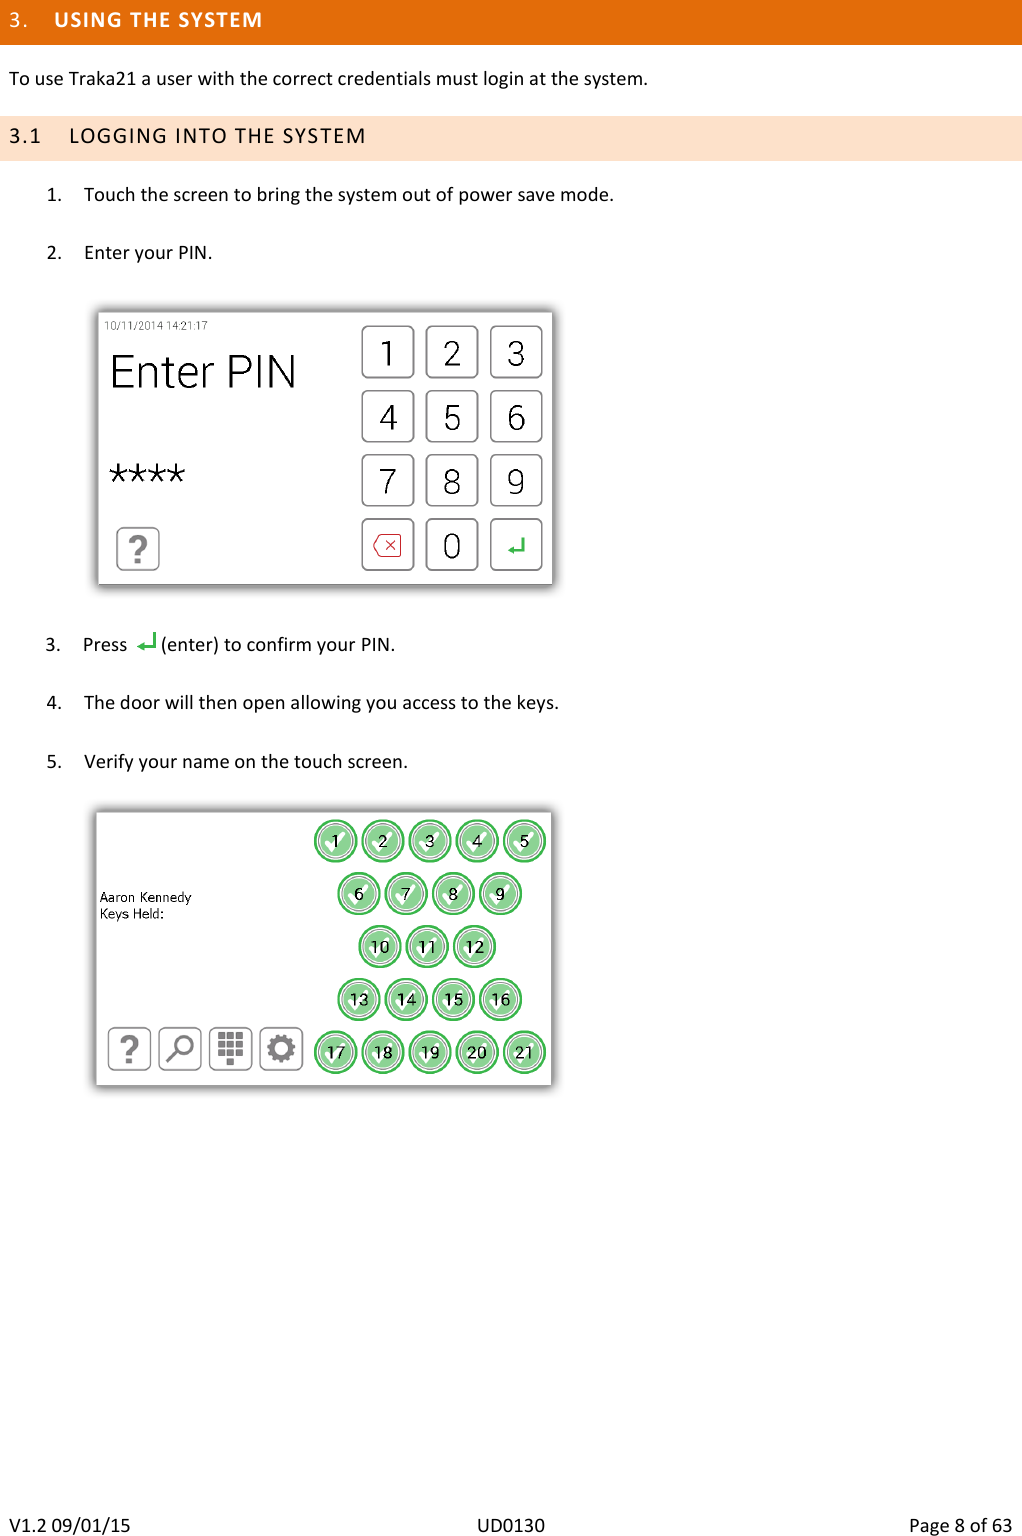   V1.2 09/01/15  UD0130  Page 8 of 63   3. USING THE SYSTEM To use Traka21 a user with the correct credentials must login at the system. 3.1 LOGGING INTO THE SYSTEM 1. Touch the screen to bring the system out of power save mode.  2. Enter your PIN.    3. Press    (enter) to confirm your PIN.  4. The door will then open allowing you access to the keys.  5. Verify your name on the touch screen.          